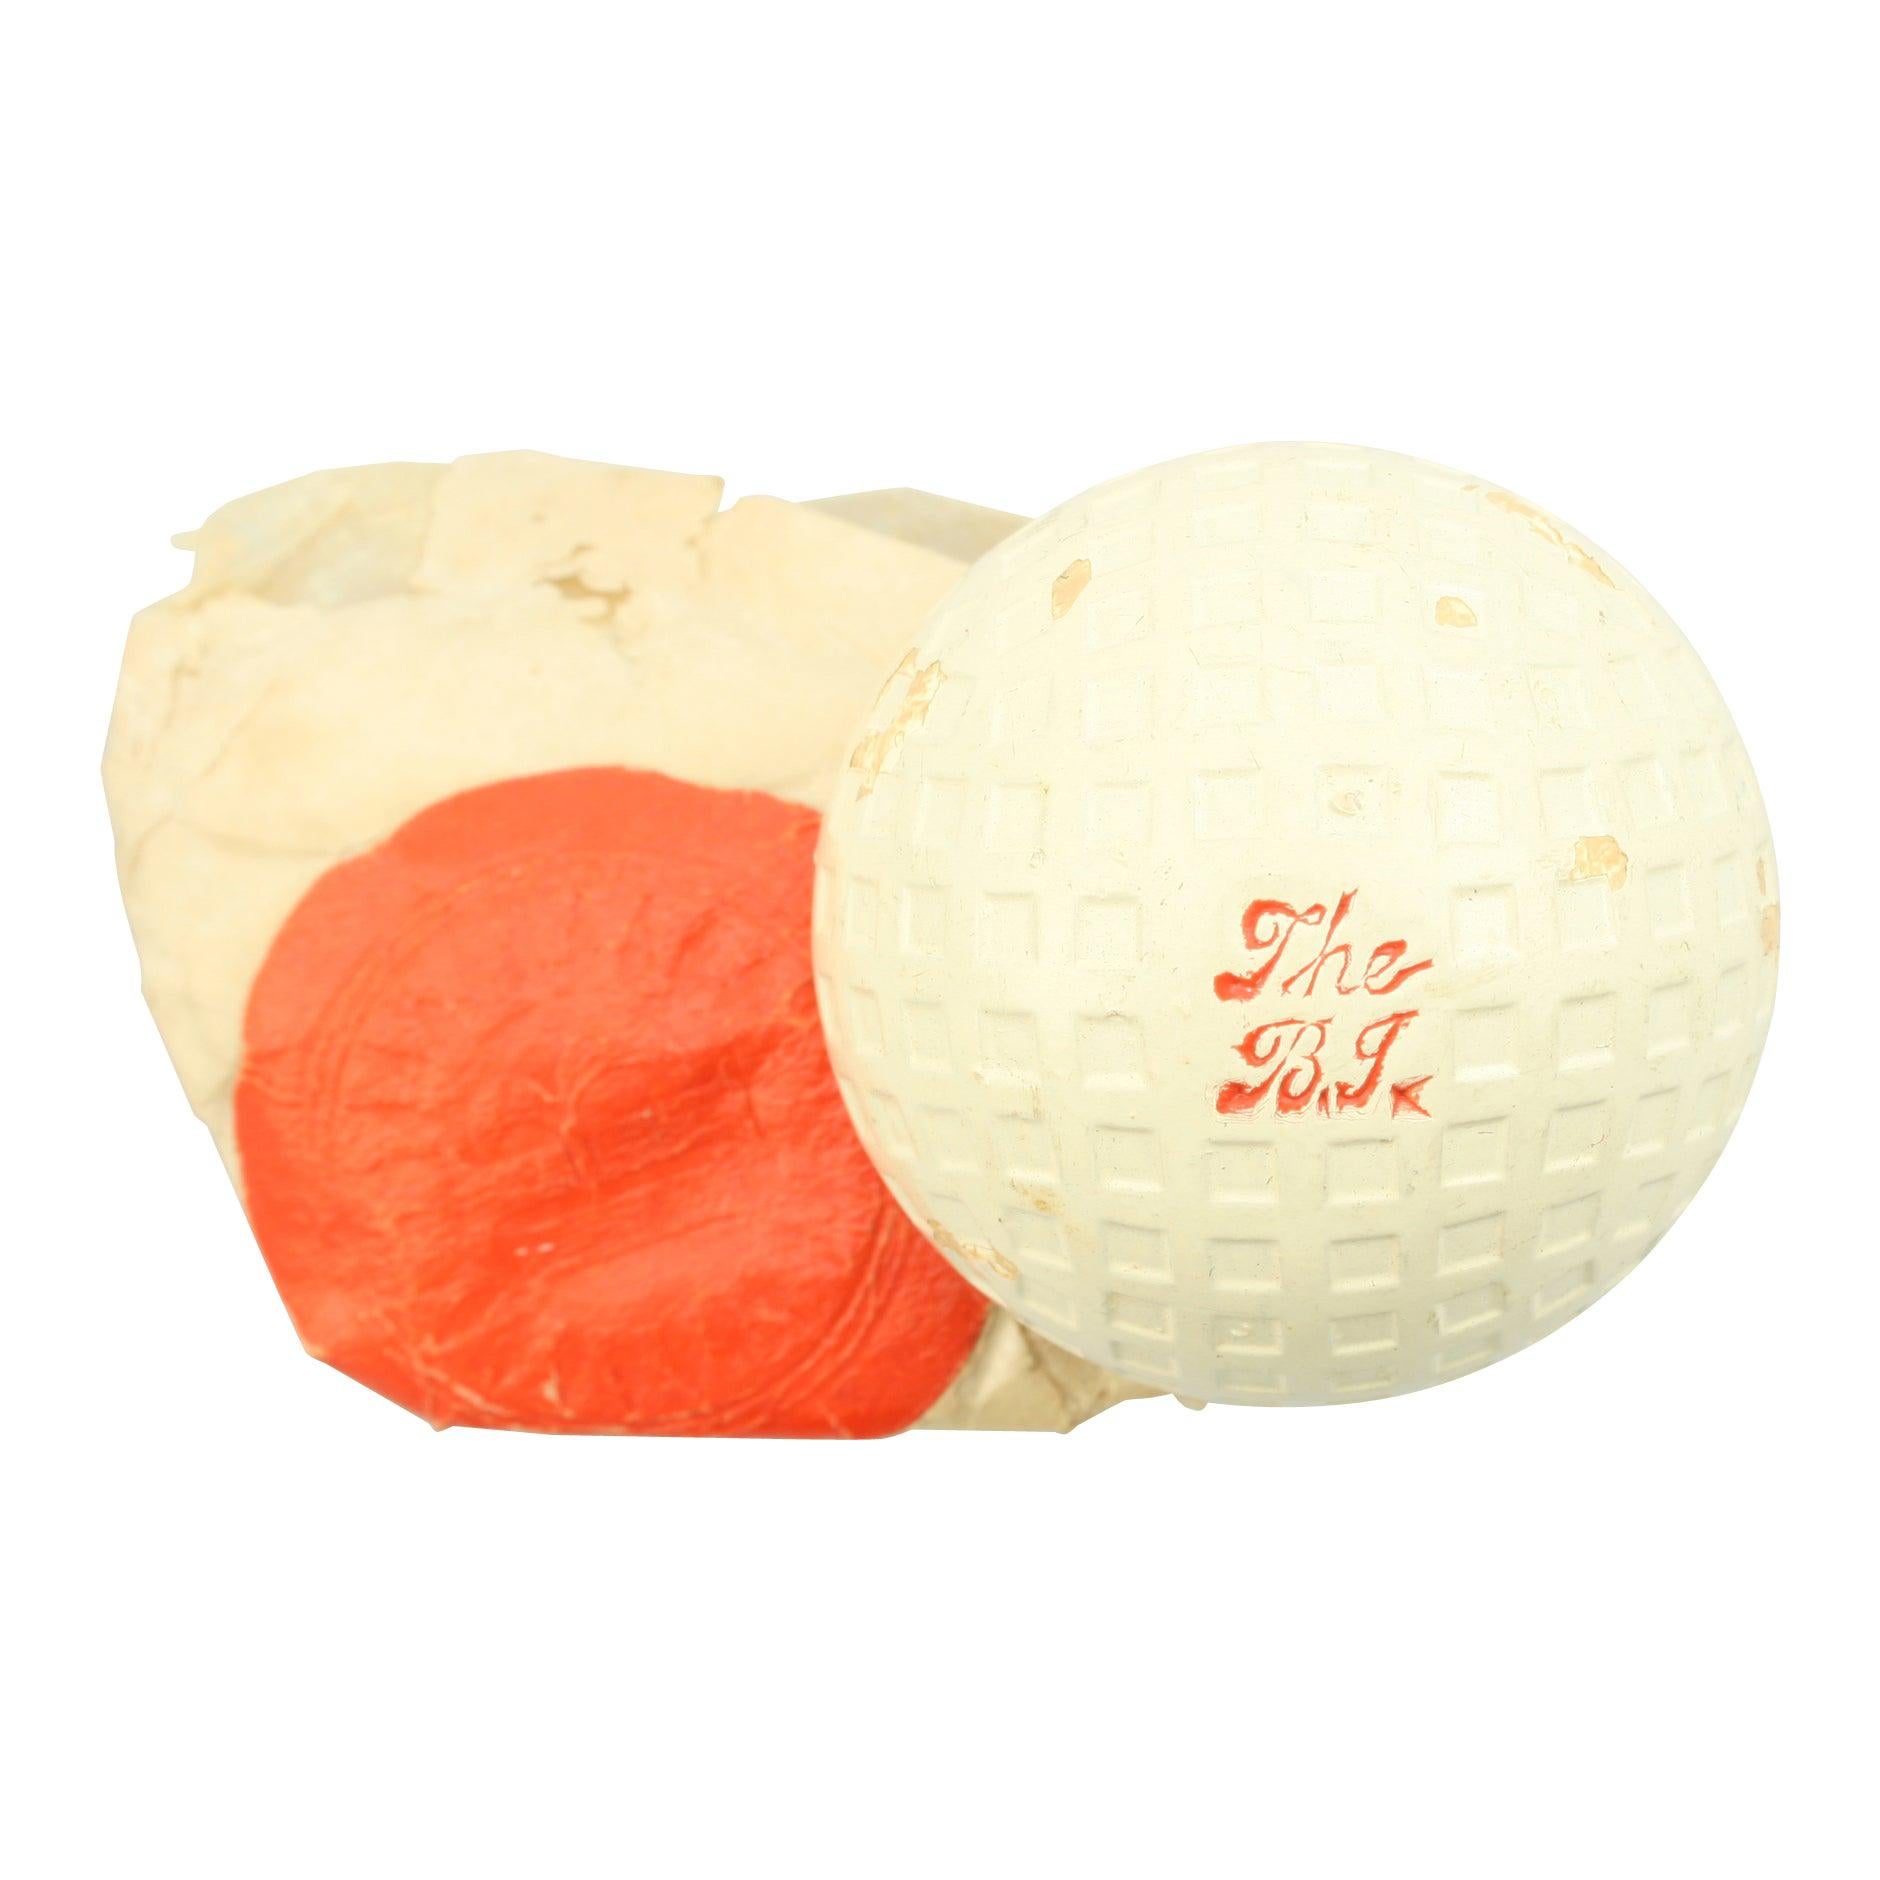 Antique Mint Condition Mesh Patterned 'B.i' Golf Ball For Sale